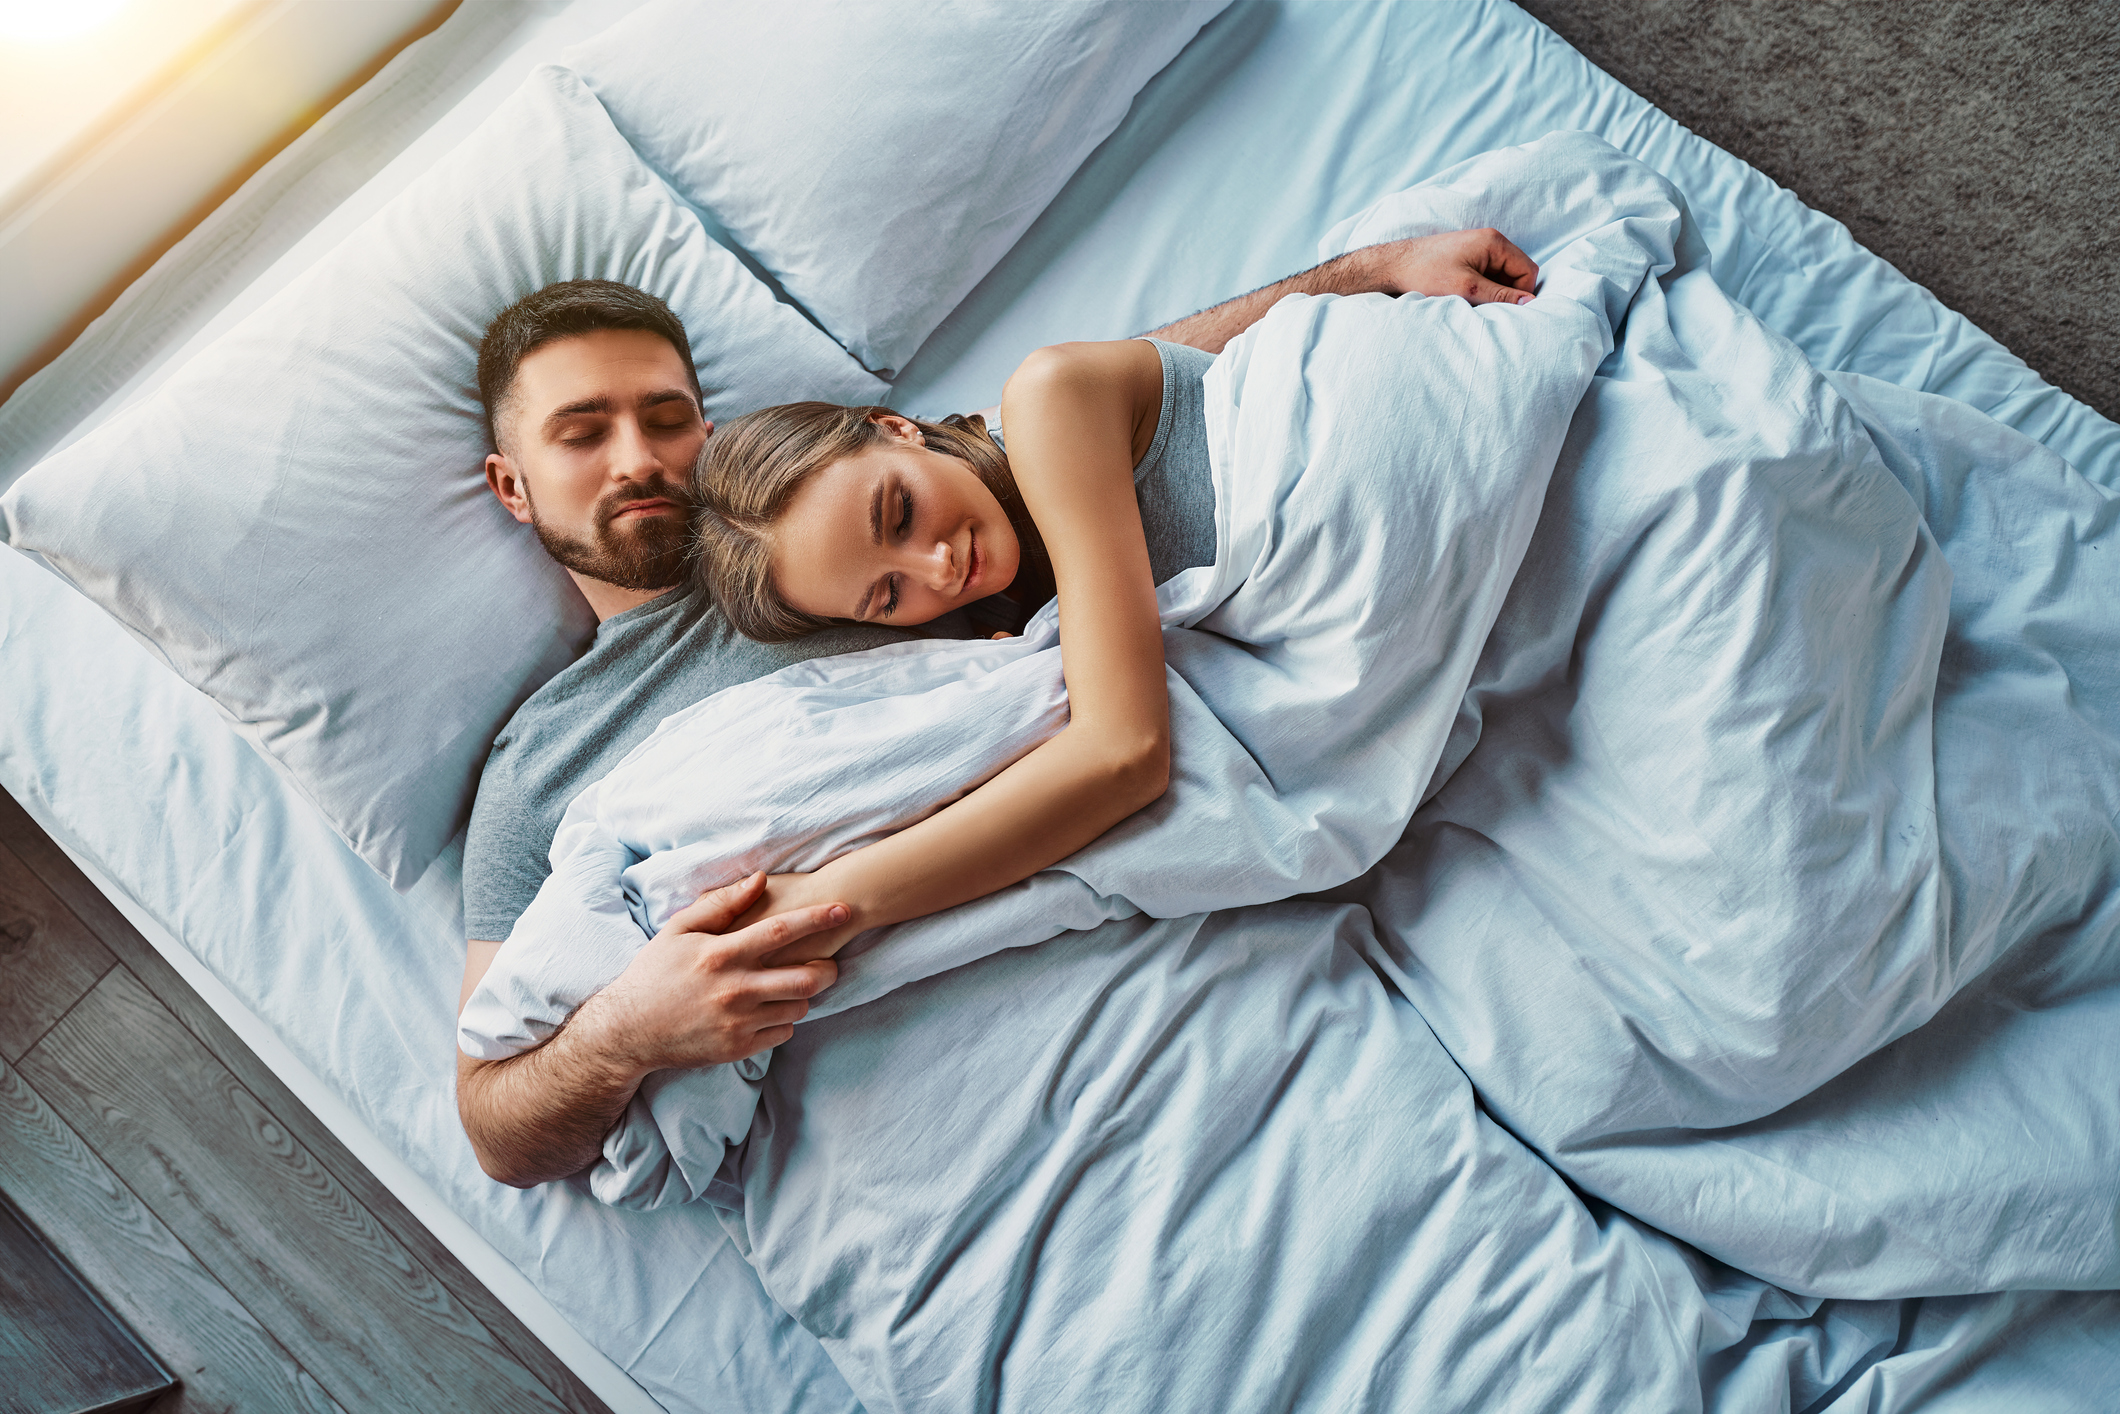 Should You Share a Bed With Your Partner? Sleep Scientists Break It Down